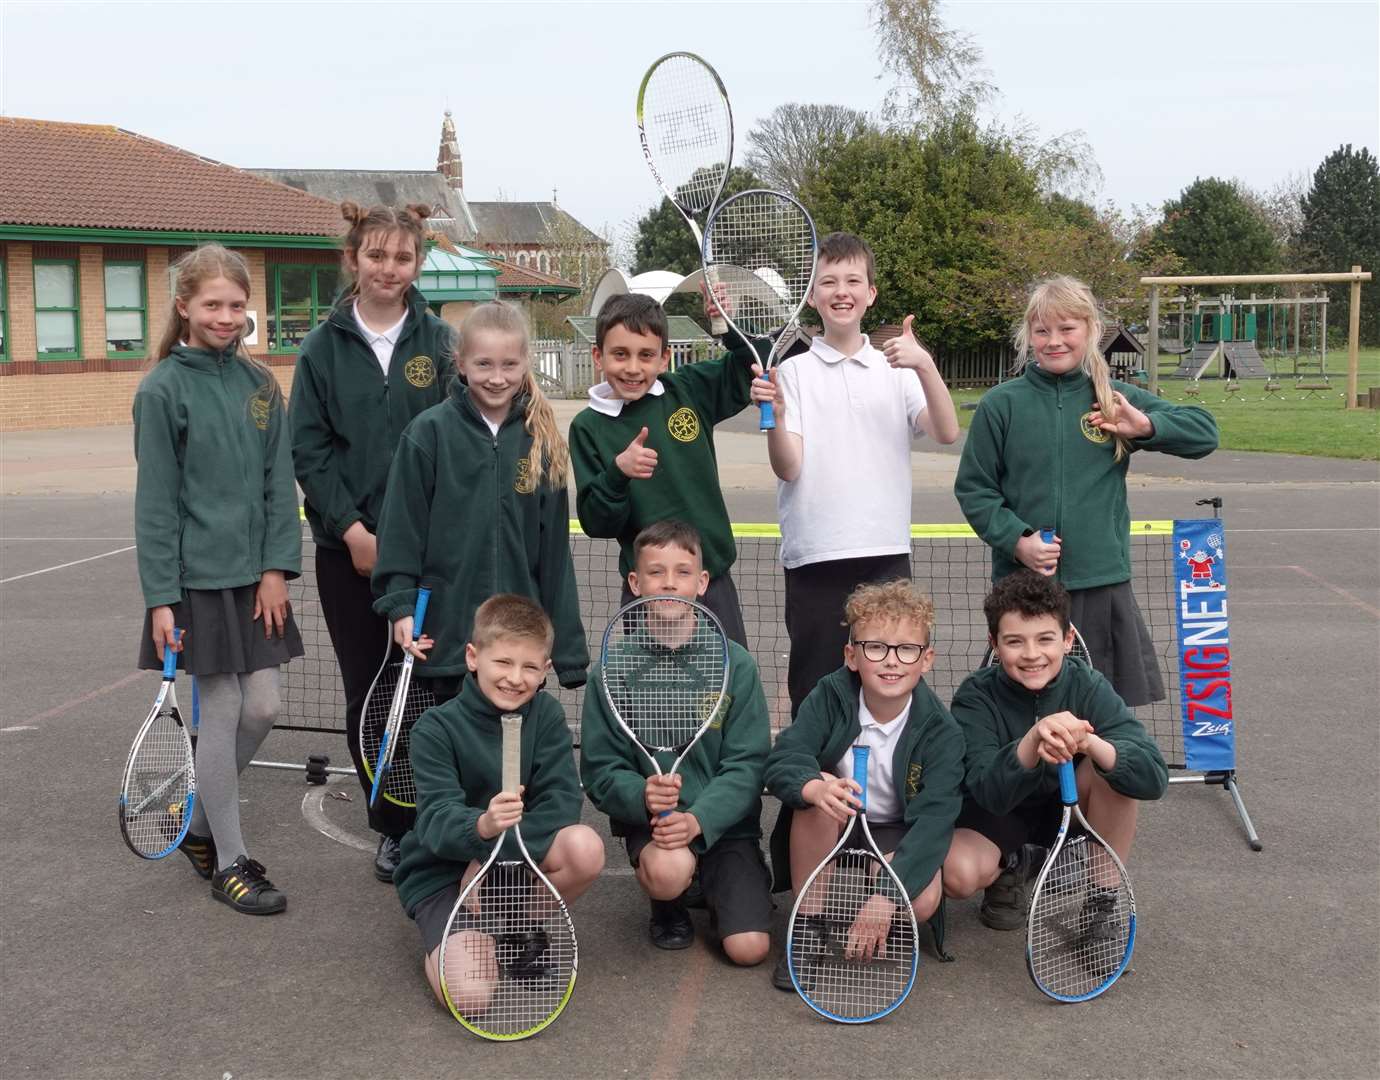 Deal Parochial Church of England Primary School's tennis programme has received national recognition